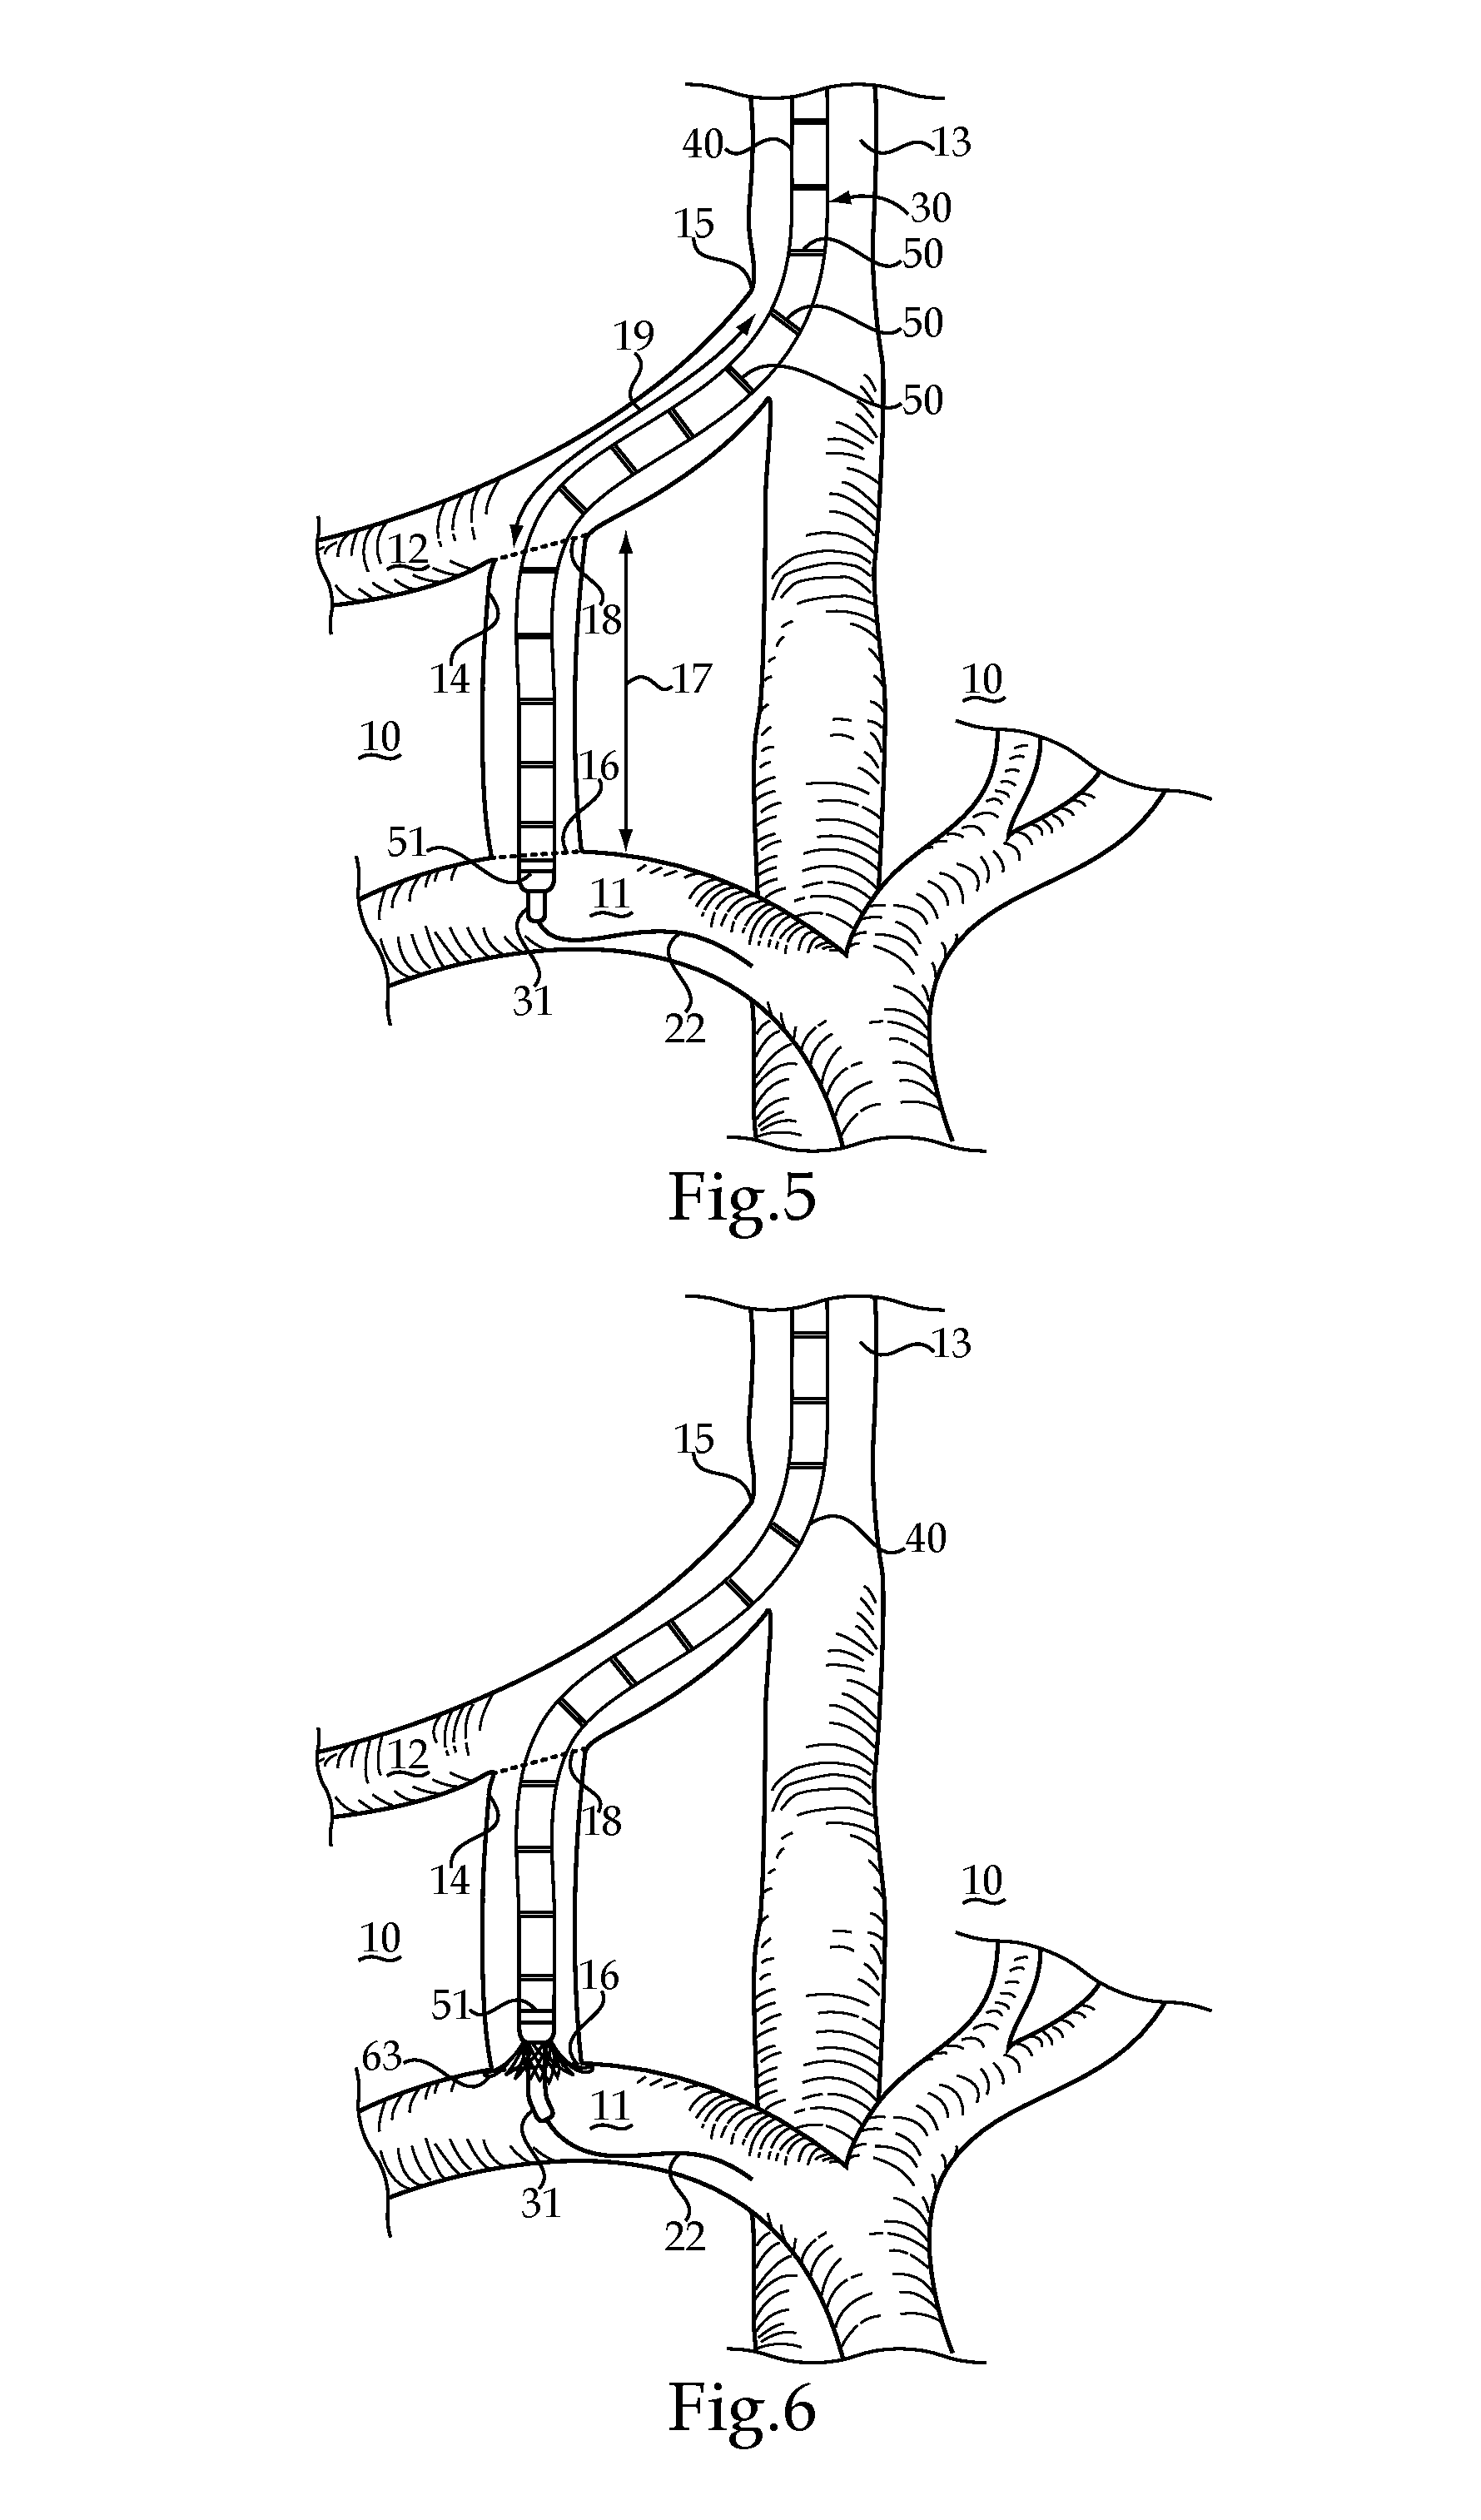 Duet stent deployment system and method of performing a transjugular intrahepatic portosystemic shunting procedure using same